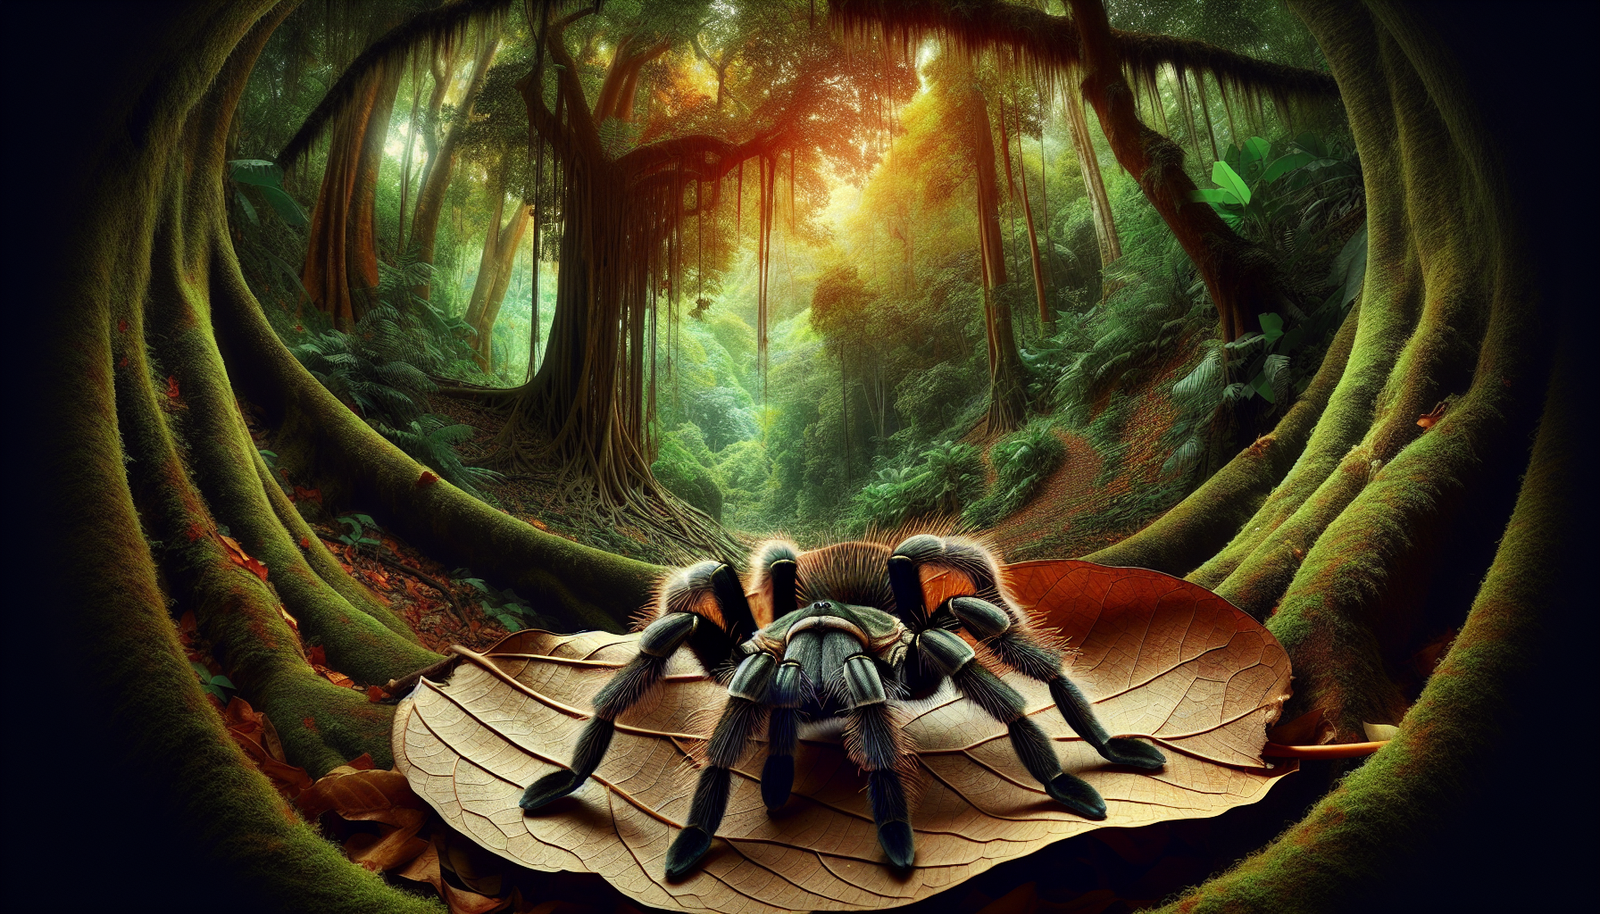 Are There Specific Environmental Changes That Increase The Risk Of Predation For Tarantulas?